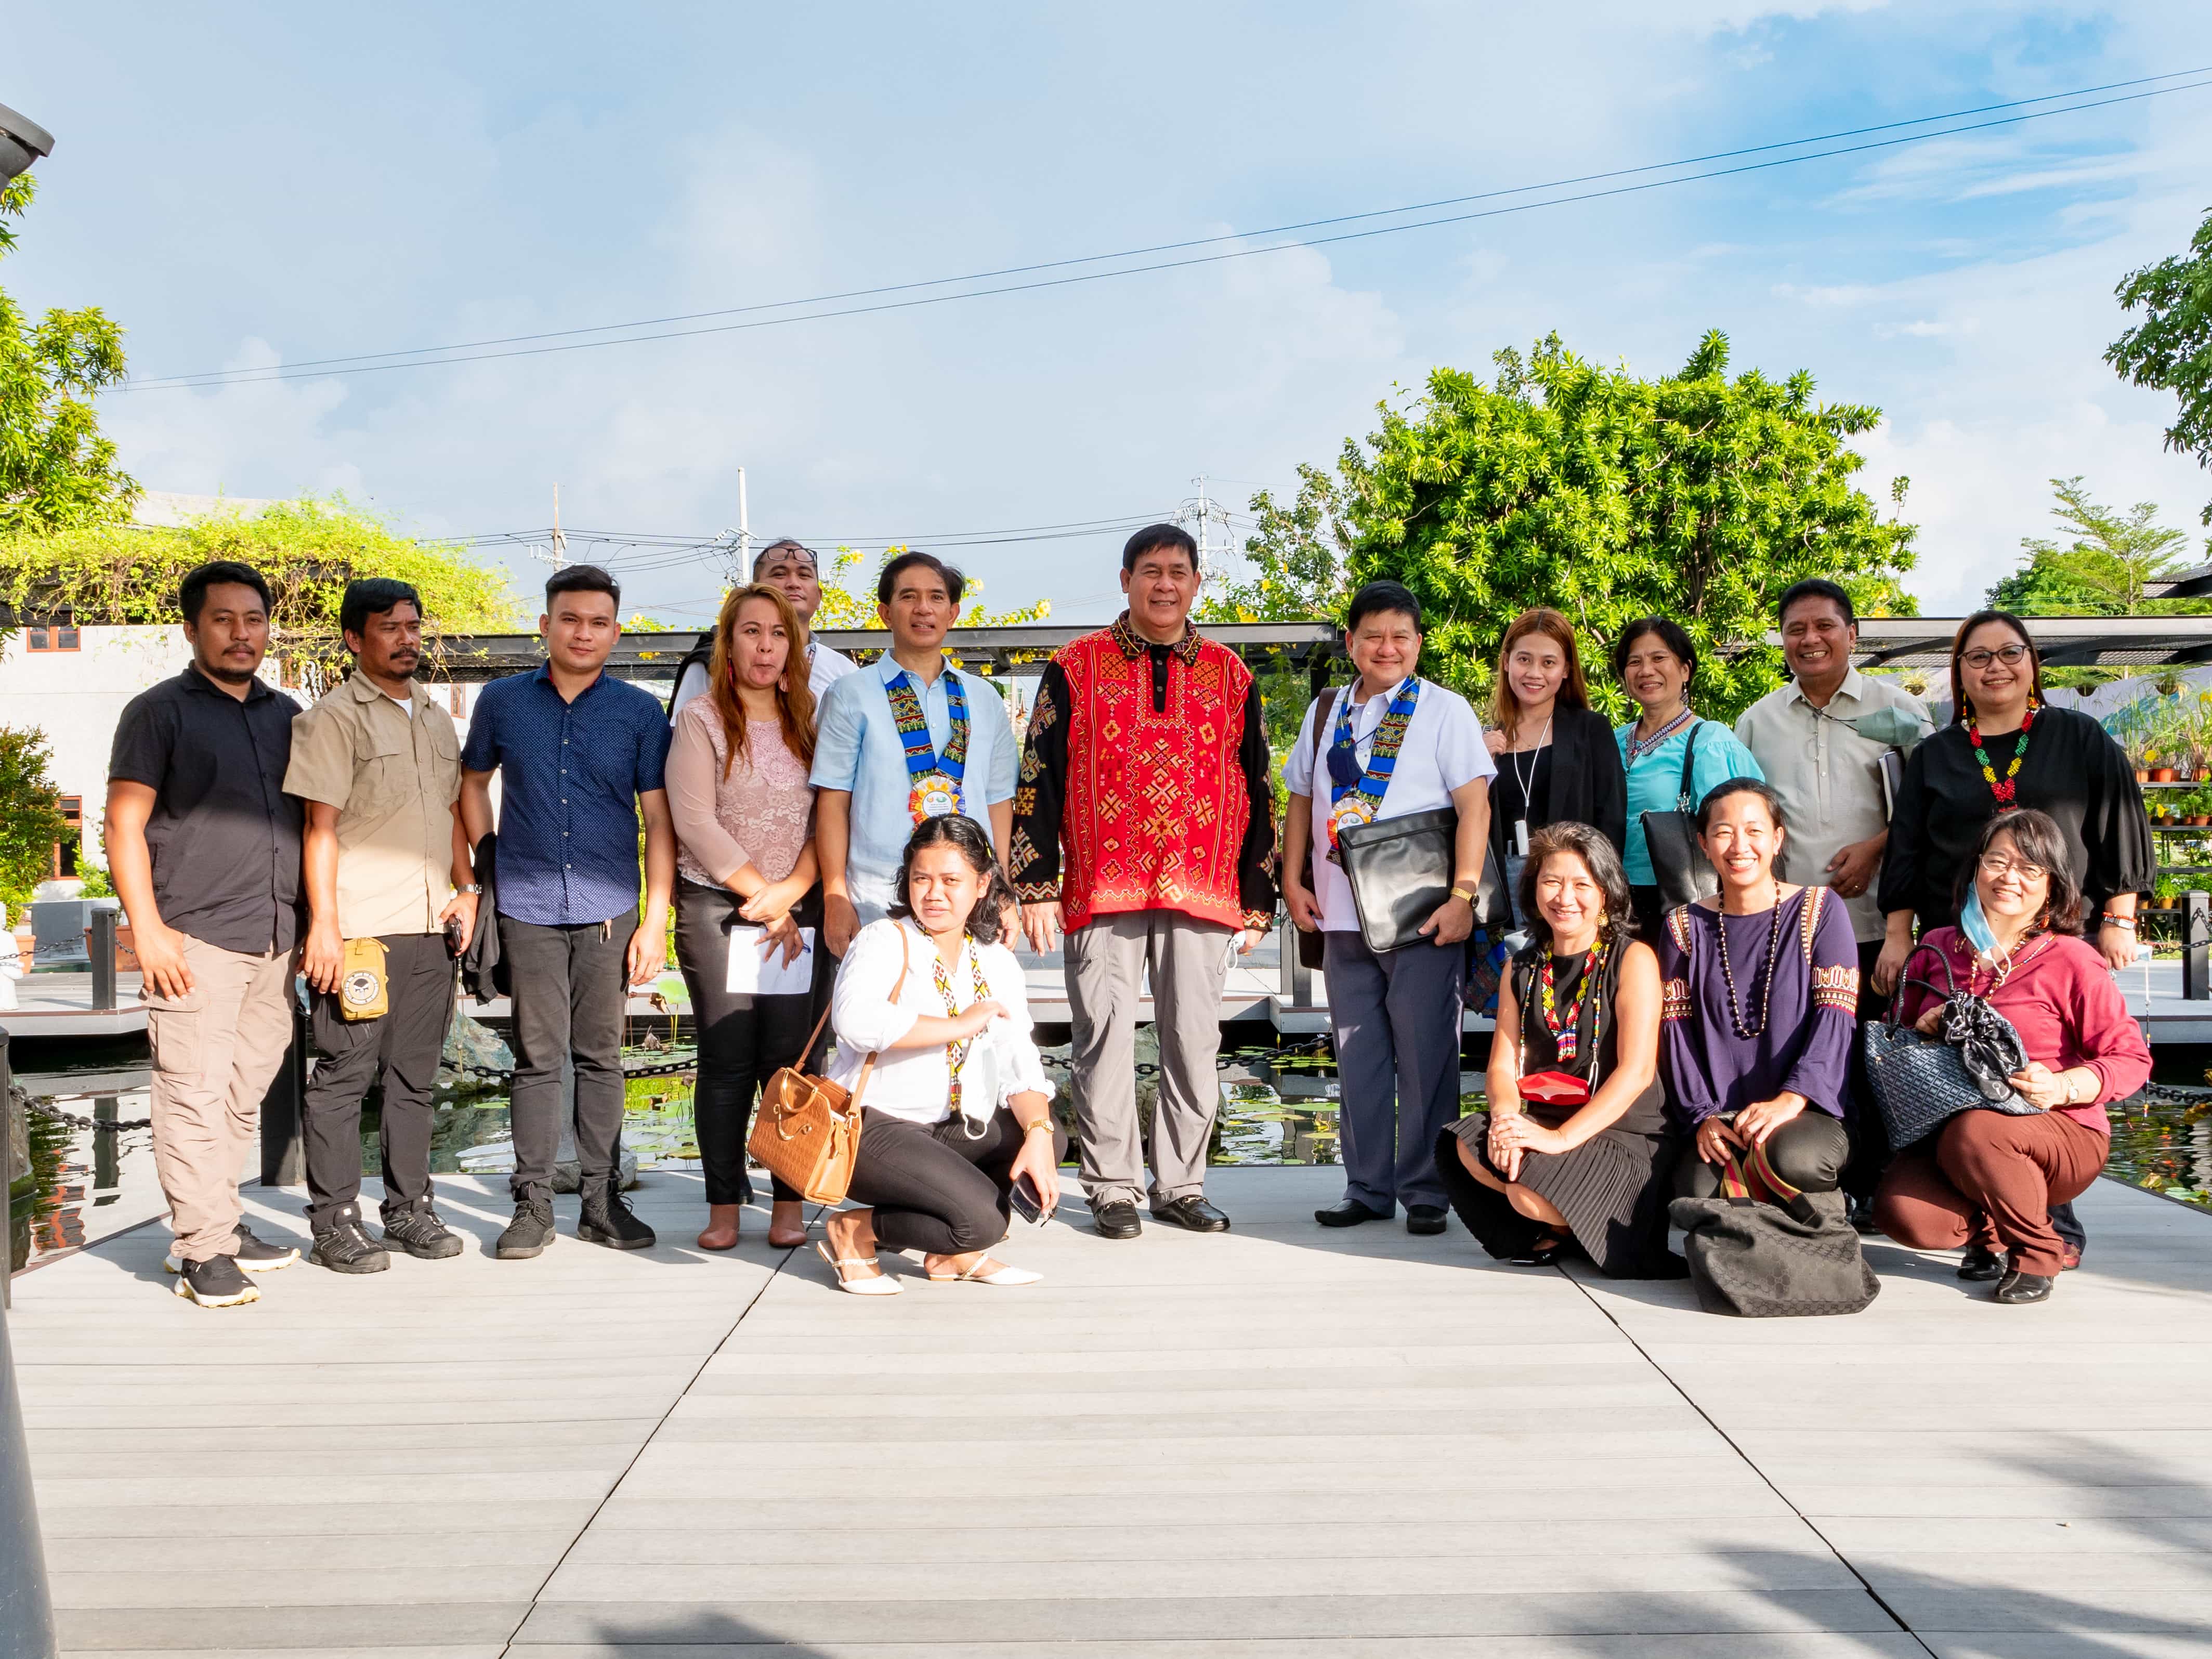 Group photo of NCIP delegates by the pond.【Photo by Daniel Lazar】